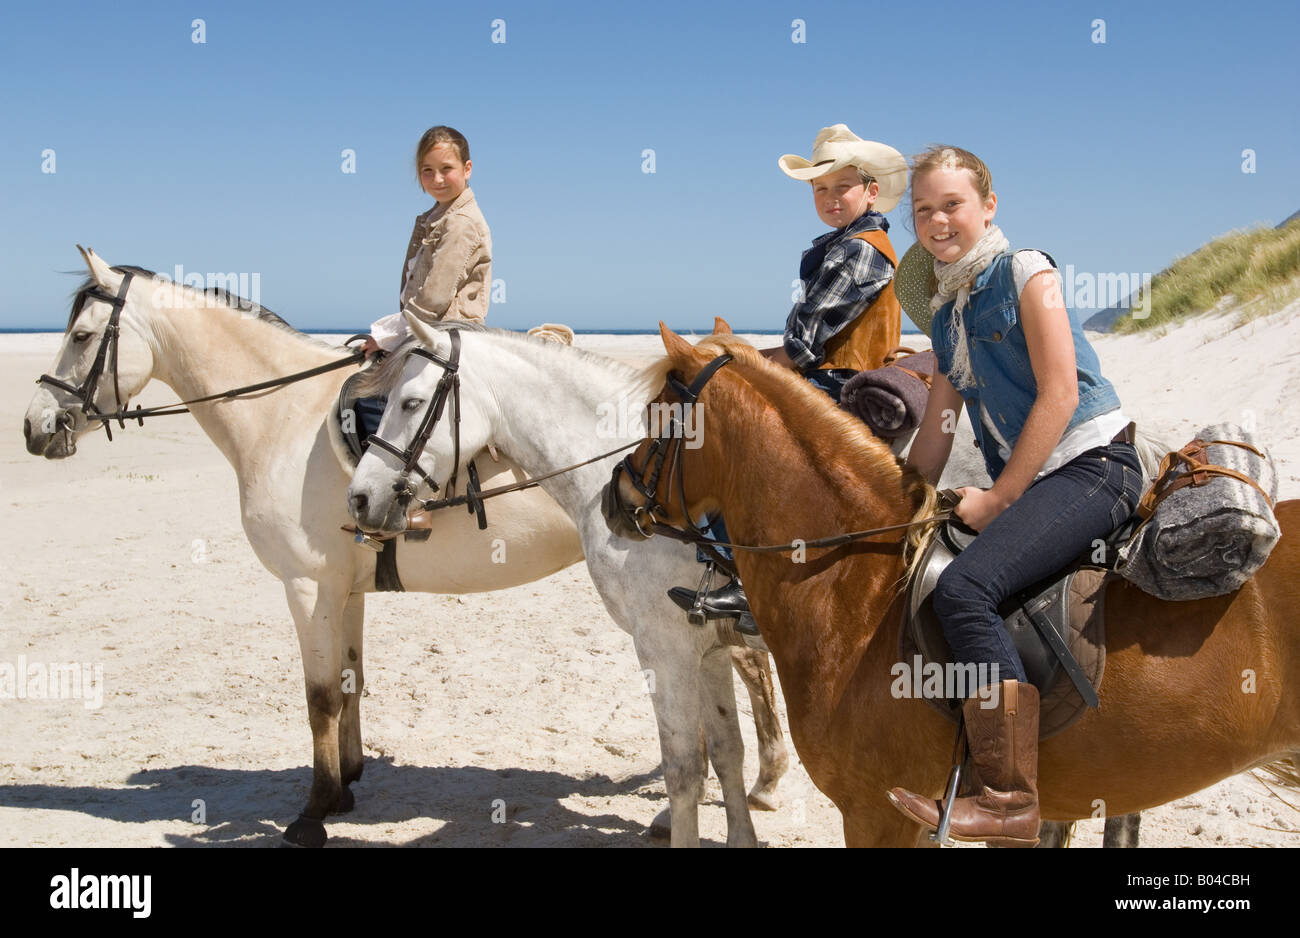 A boy and girls riding horses Stock Photo